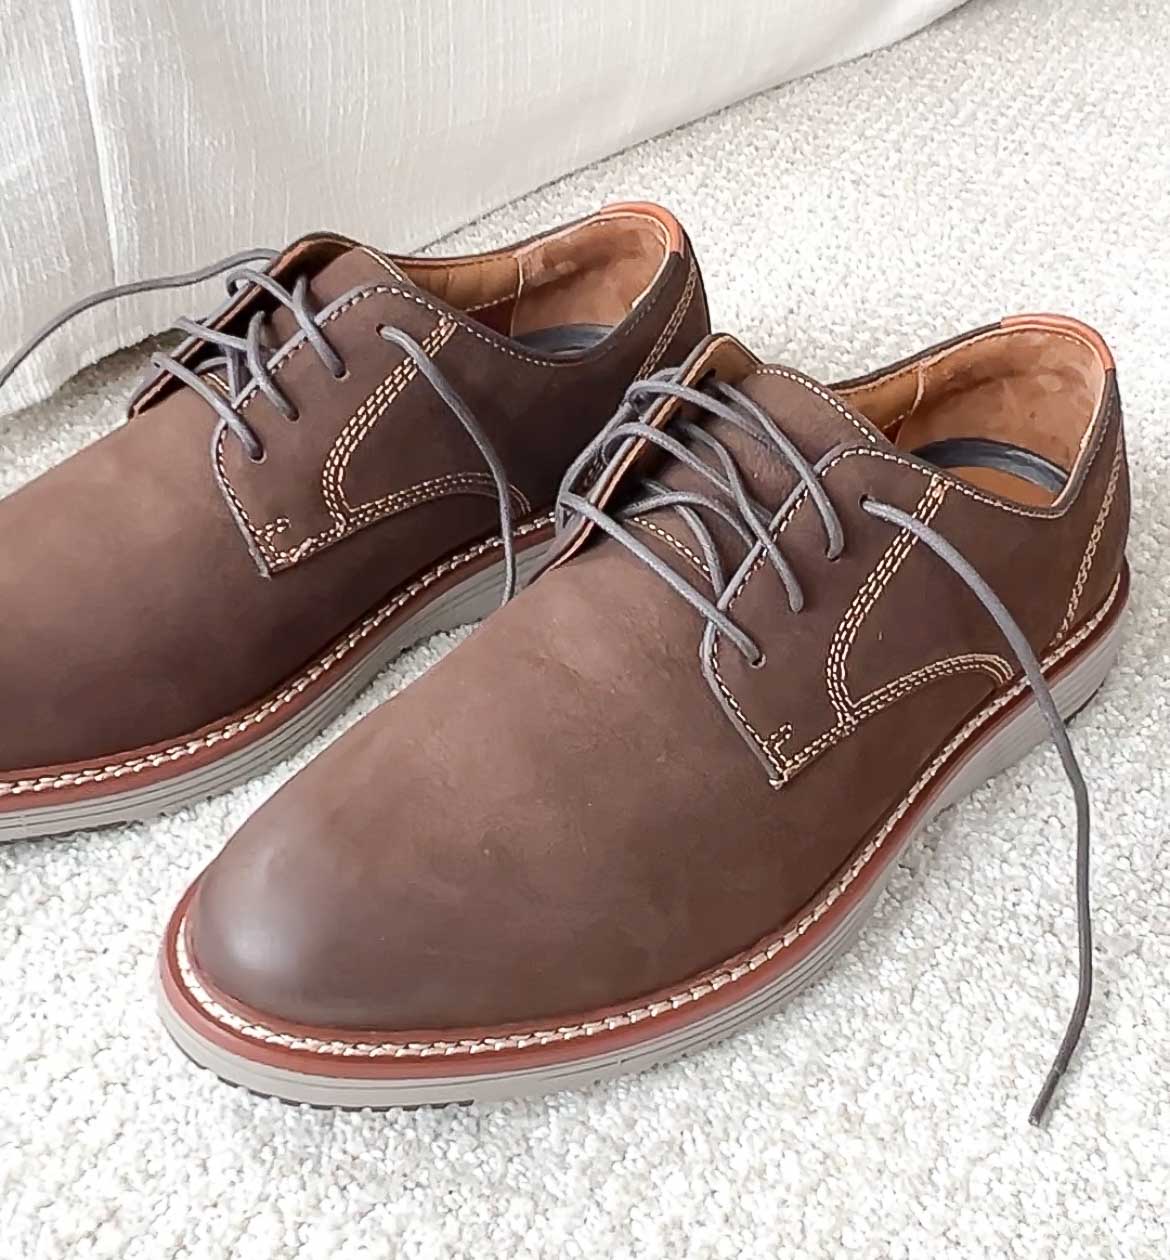 Pair of brown dressy casual shoes